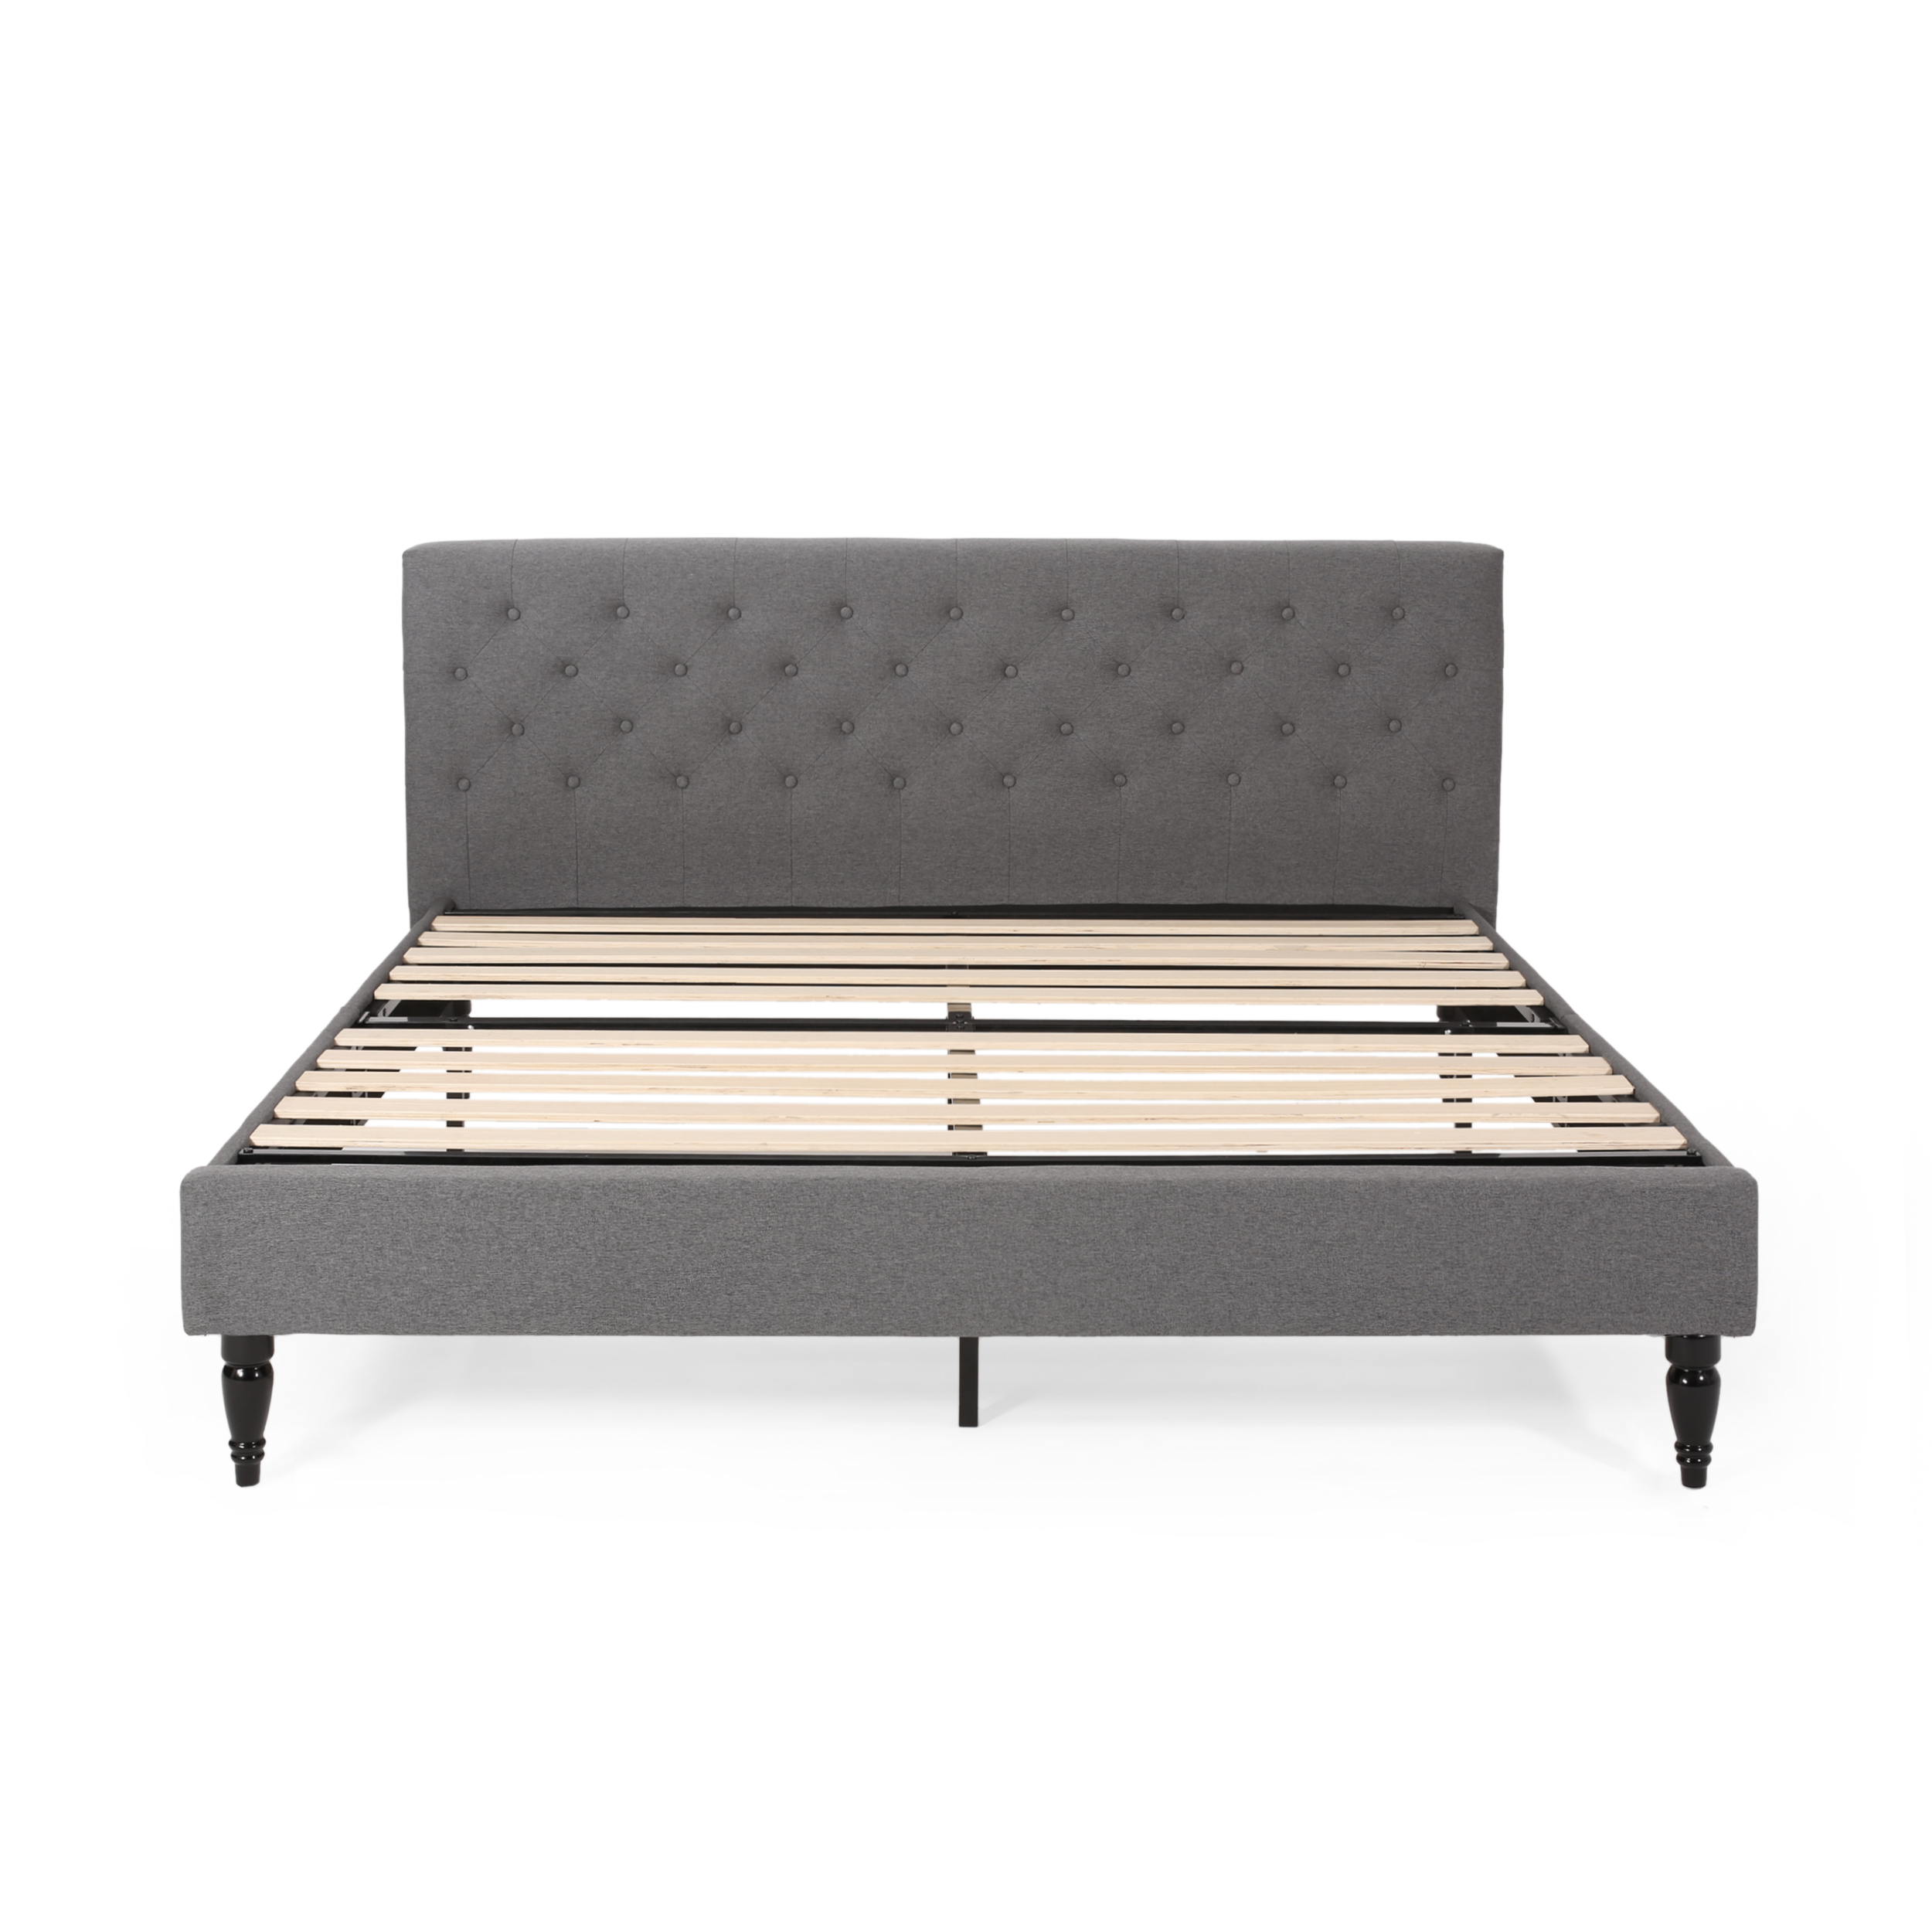 GDF Studio Vallarta Contemporary Fabric Upholstered Tufted Bed, Charcoal Gray and Black King - image 1 of 13